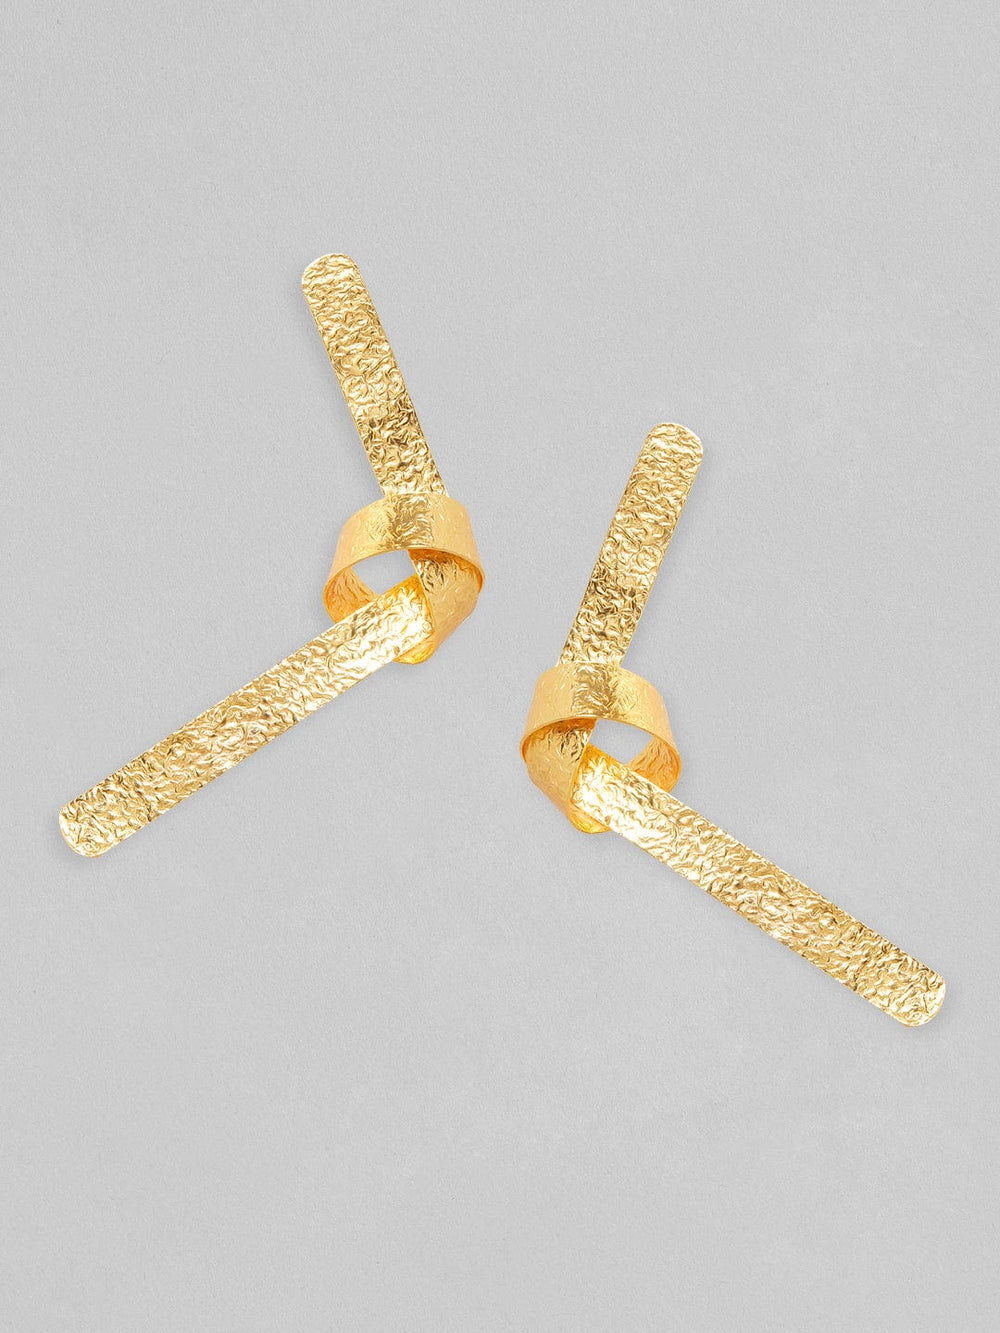 Rubans Voguish 18K Gold Plated On Copper Handcrafted Contemporary Knot Stud Textured Earrings. Earrings